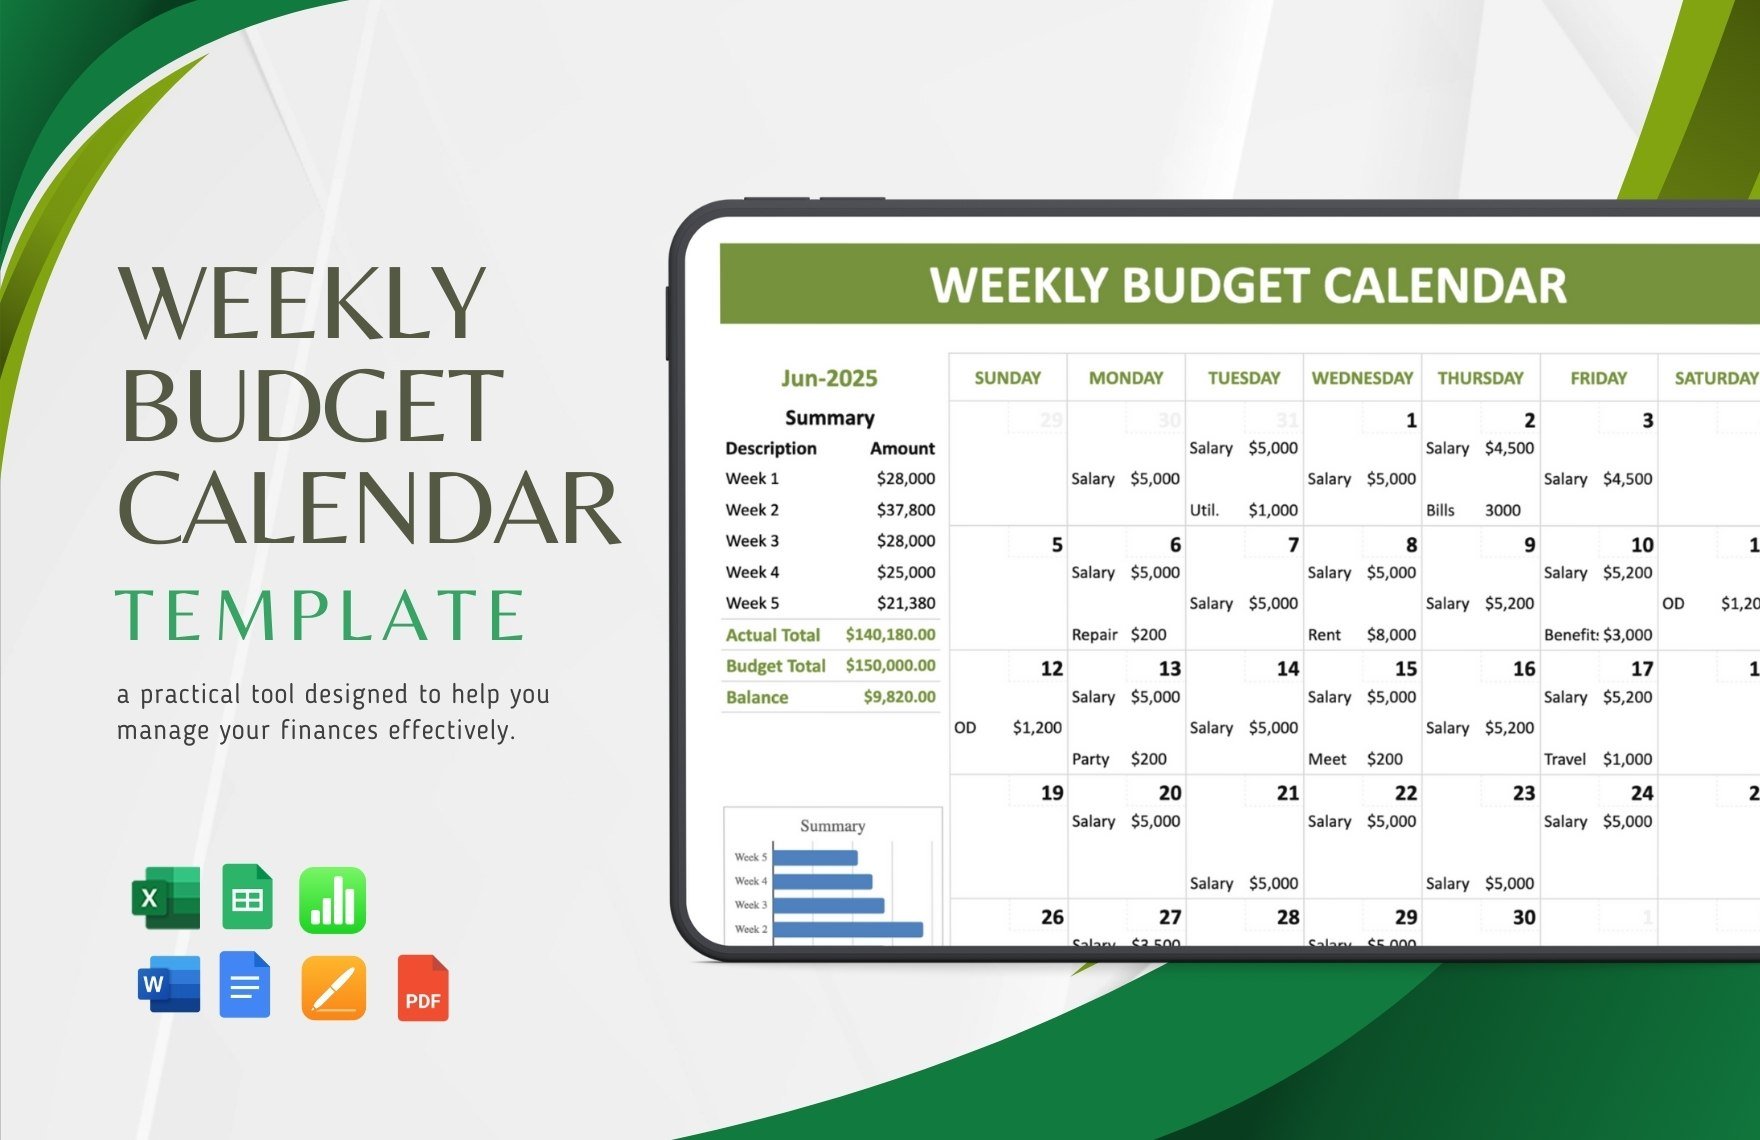 Weekly Budget Calendar Template in Word, Google Docs, Excel, PDF, Google Sheets, Apple Pages, Apple Numbers